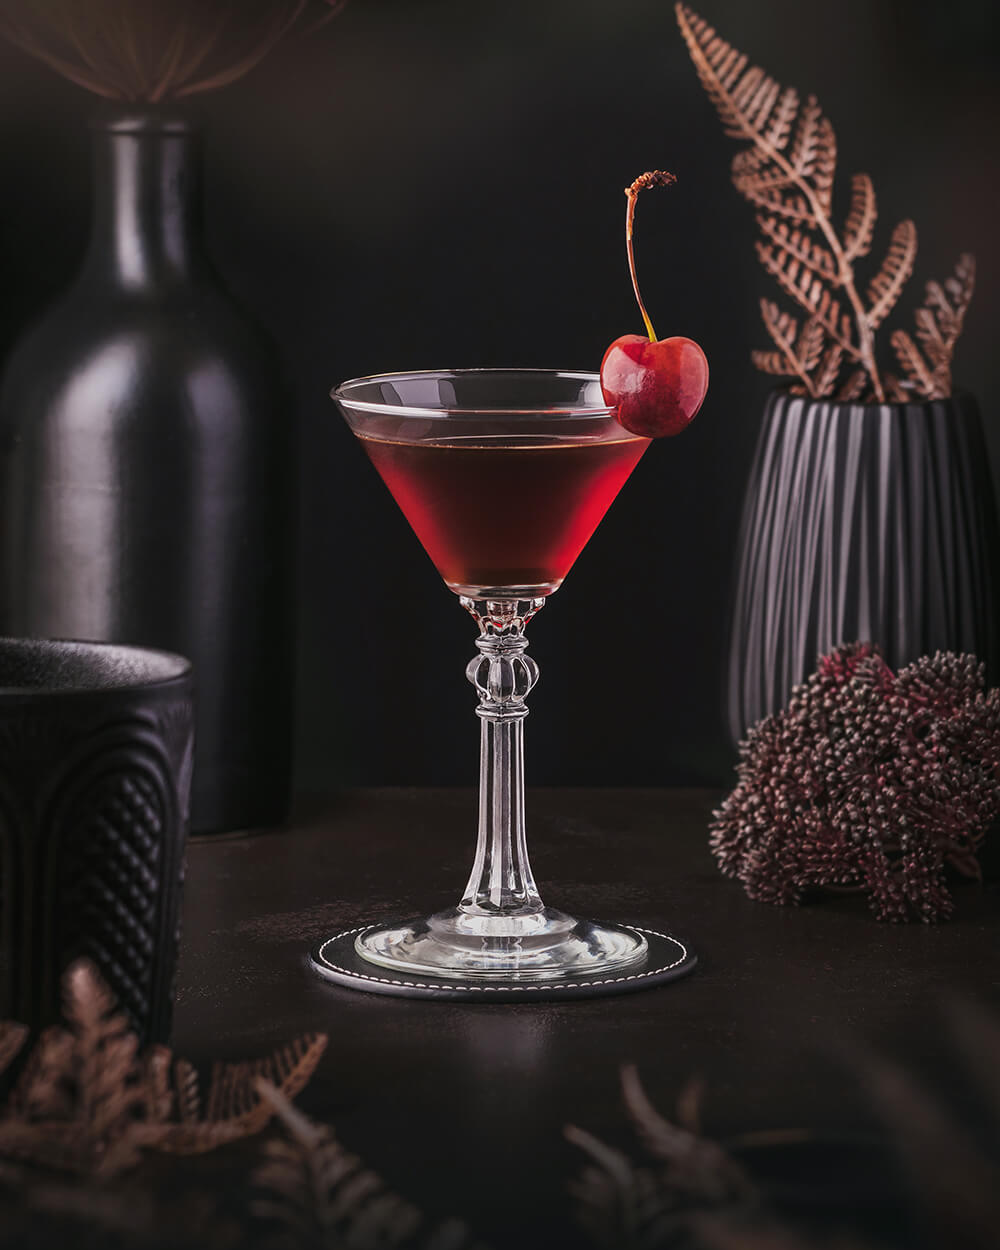 Remember the Maine – Rye, Vermouth & Cherry